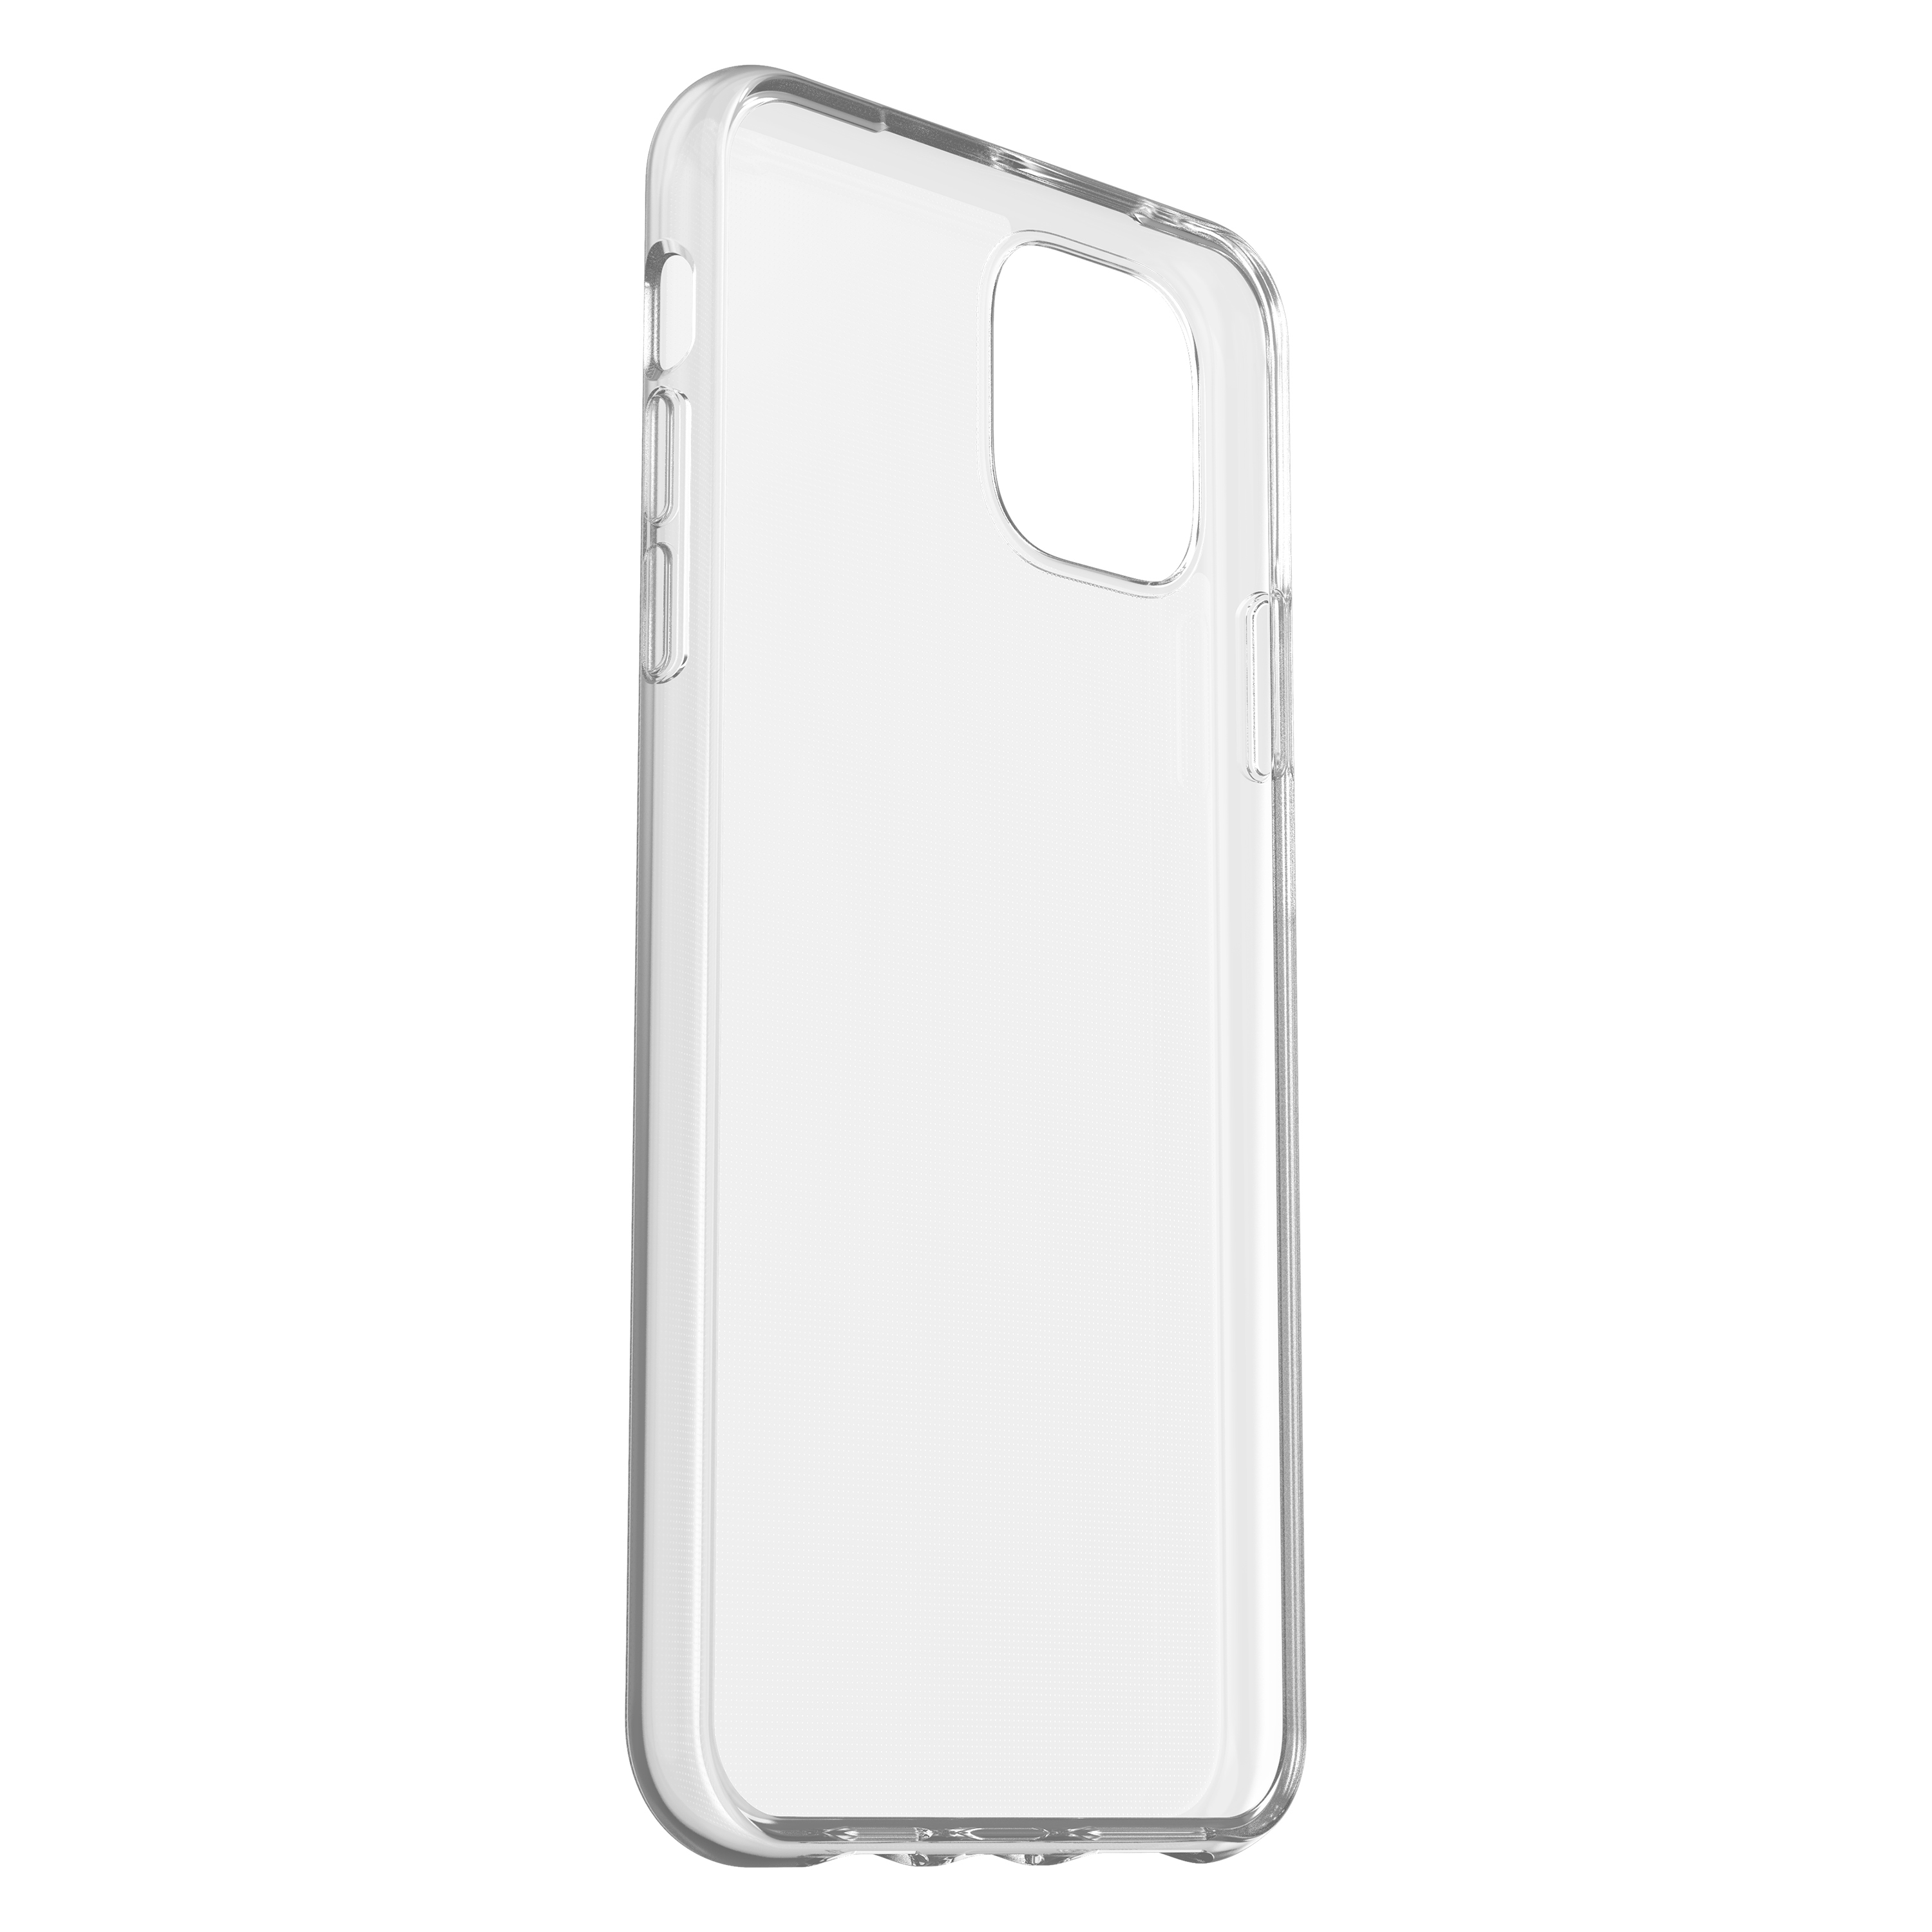 Skin, Clearly Transparent Backcover, 11 Max, Protected iPhone OTTERBOX Pro Apple,